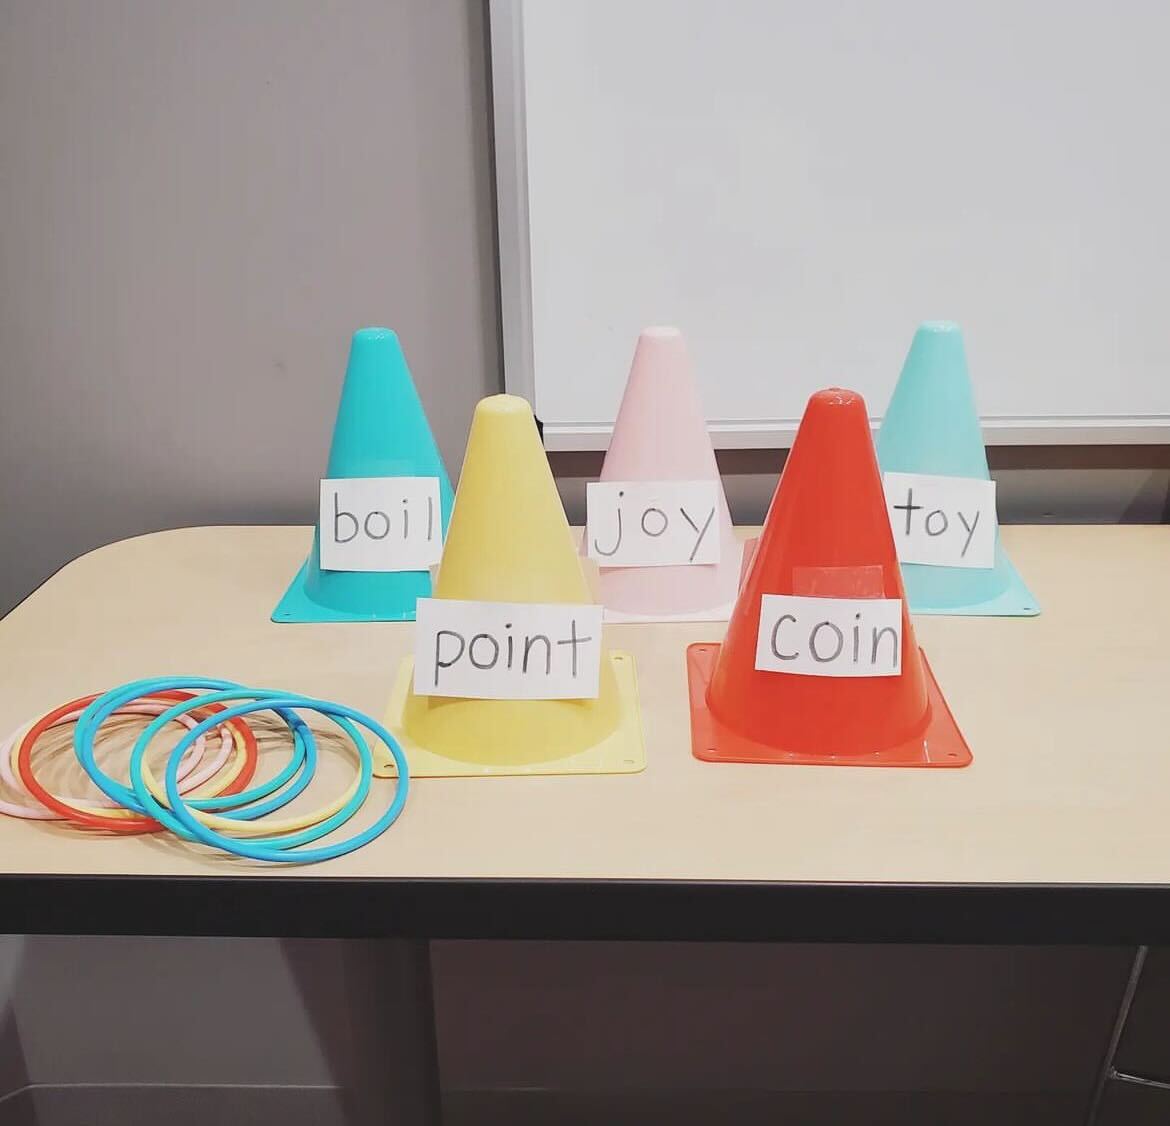 Cones and rings displayed on table. Cones have sight words velcroed to the front, from left to right: boil, point, joy, coin, toy.